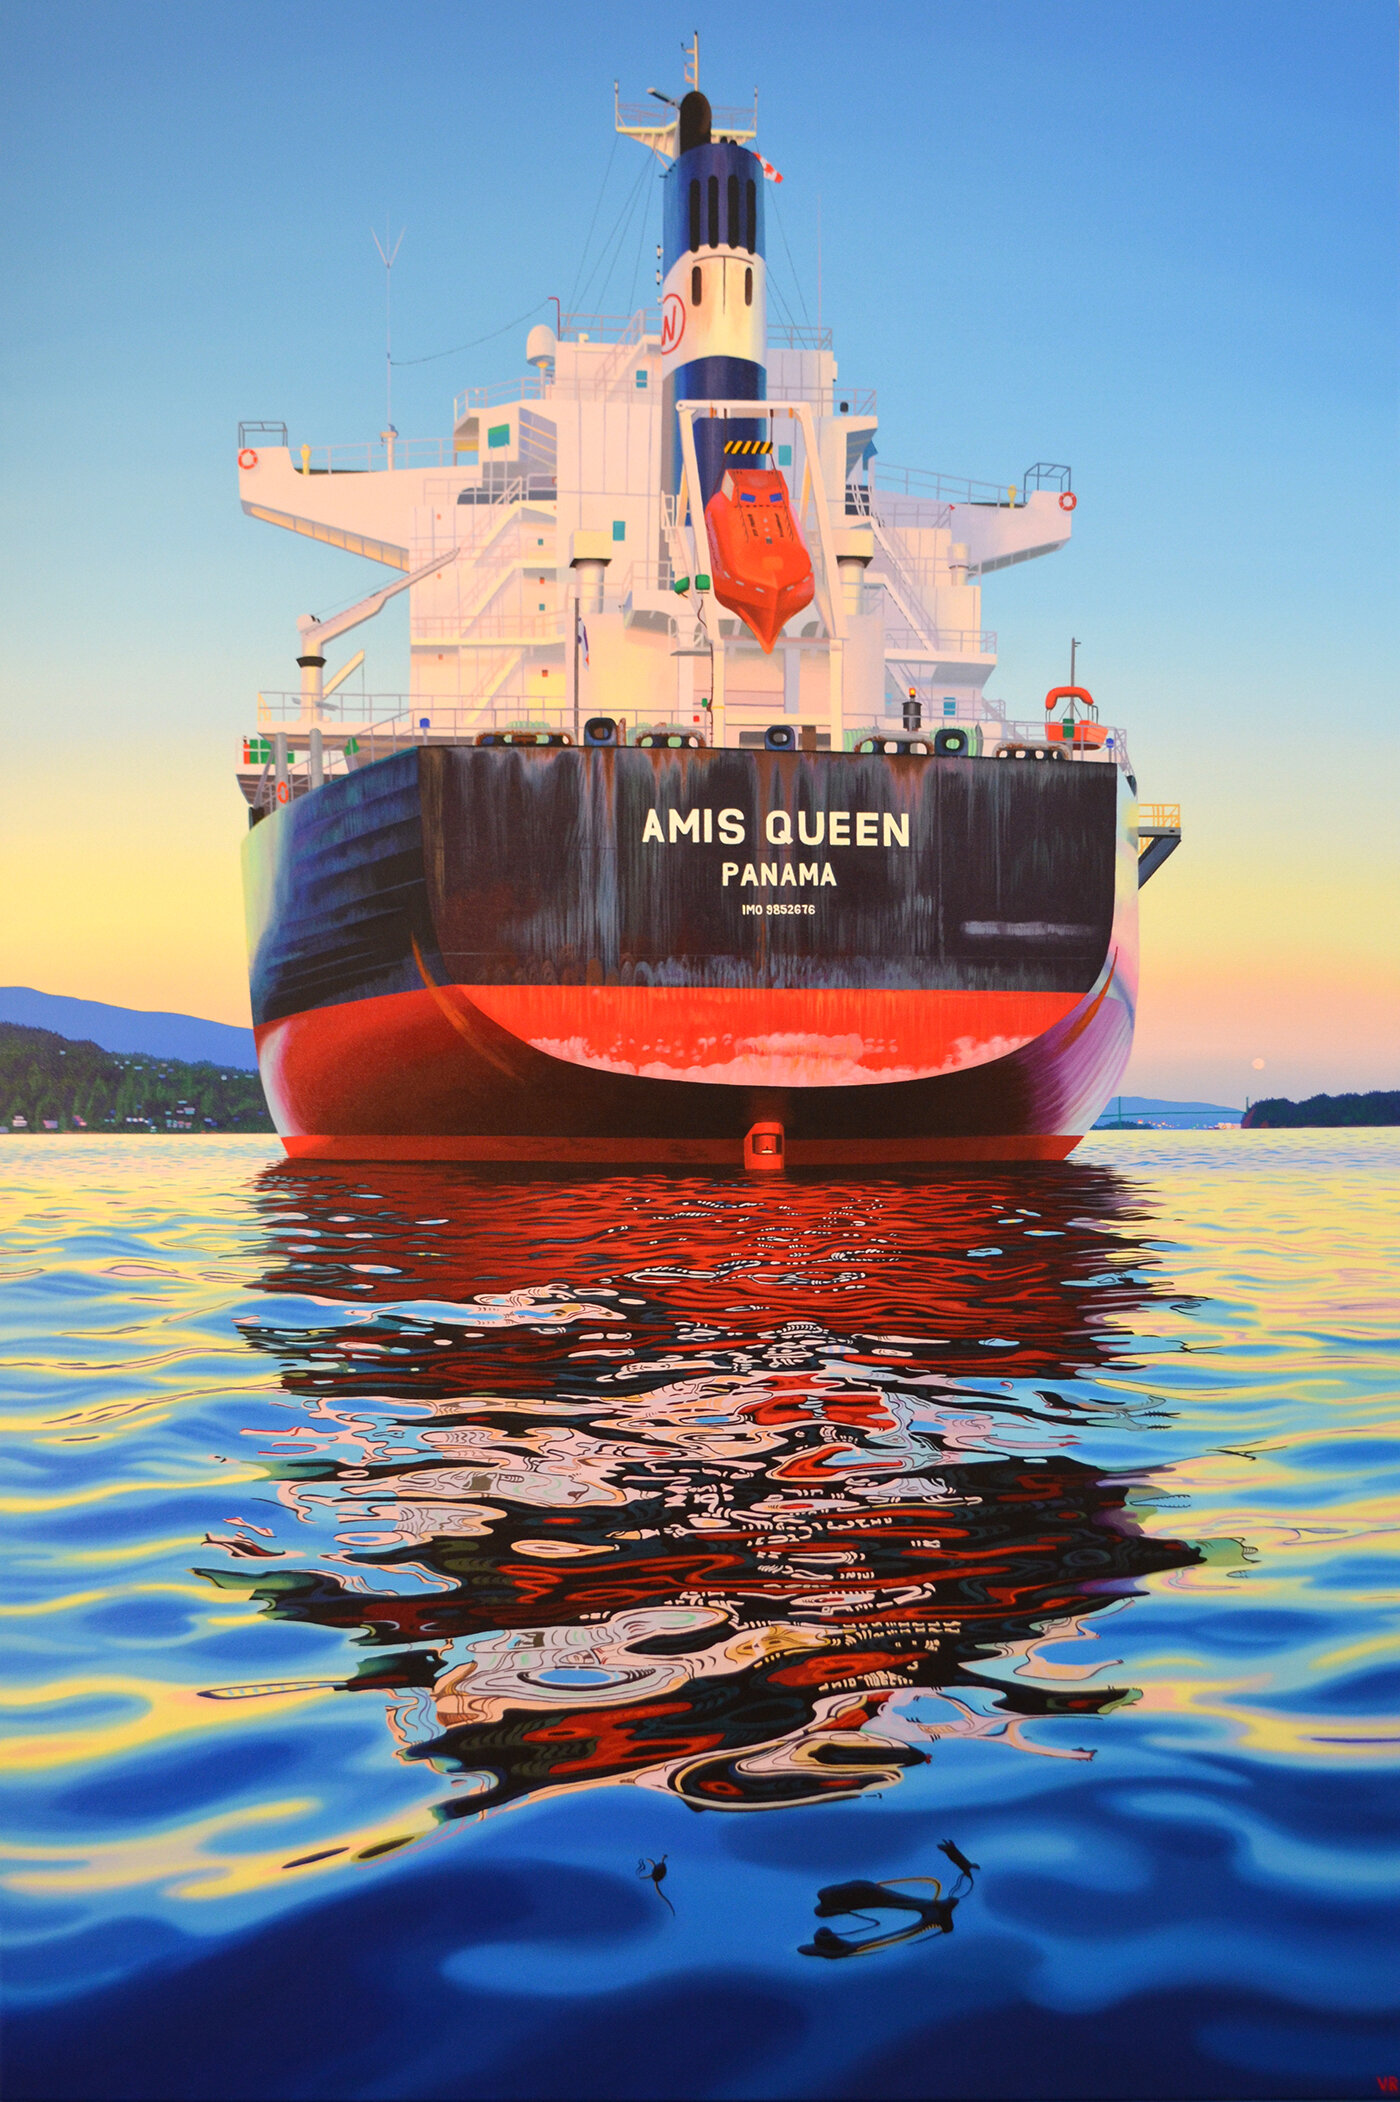   Amis Queen    60 x 40    acrylic on canvas  